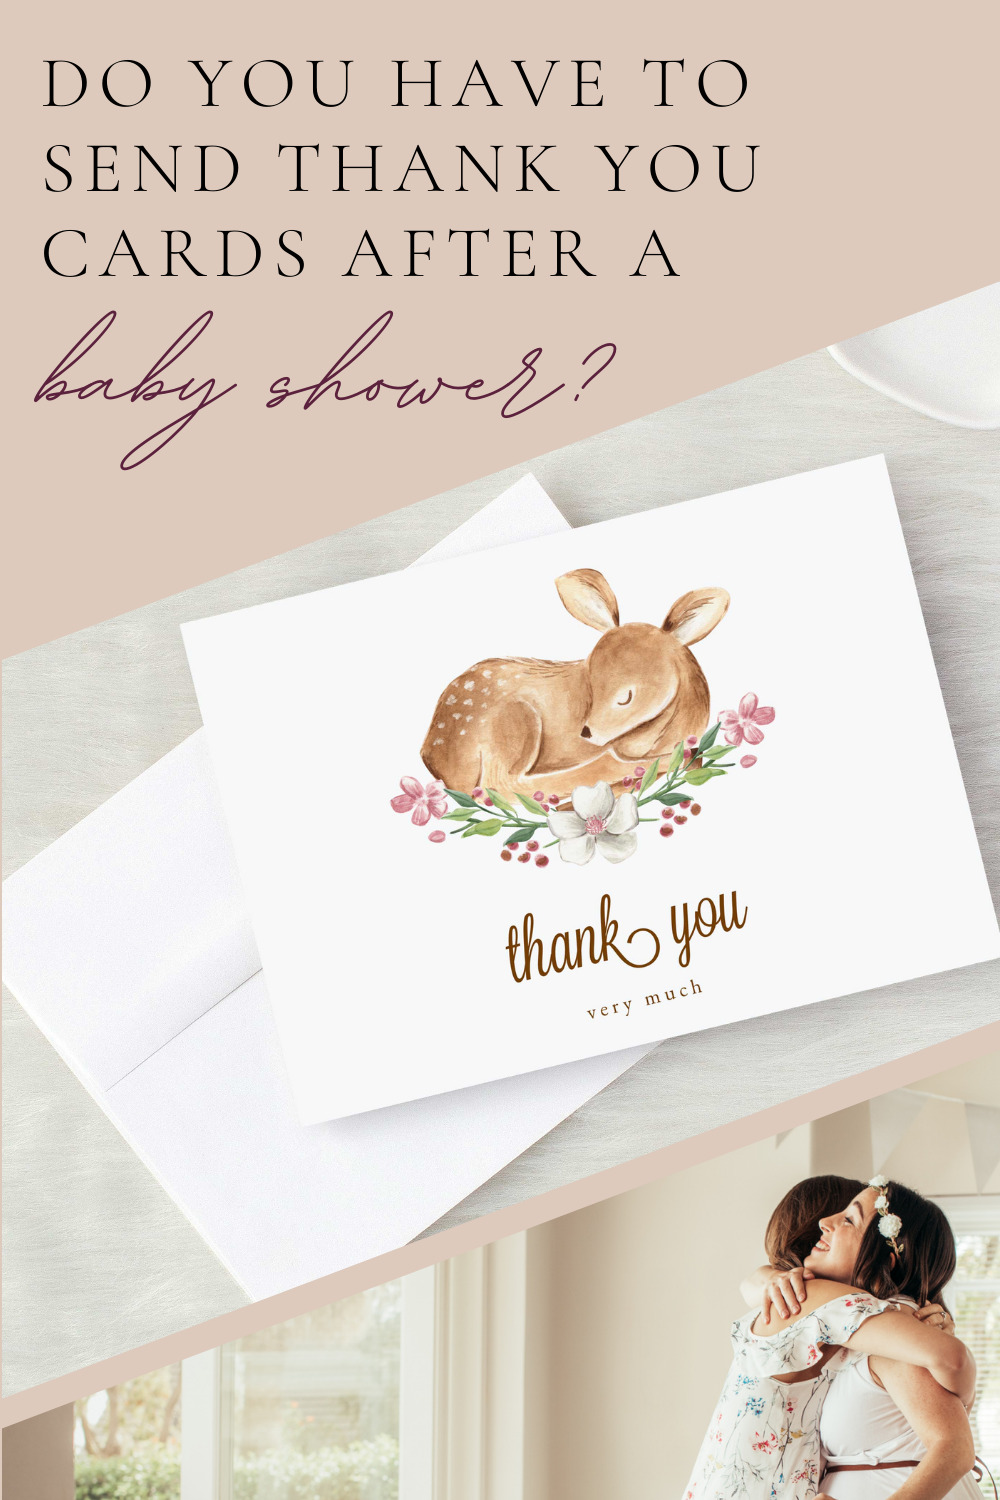 Do you have to send Thank you cards after a Baby Shower?